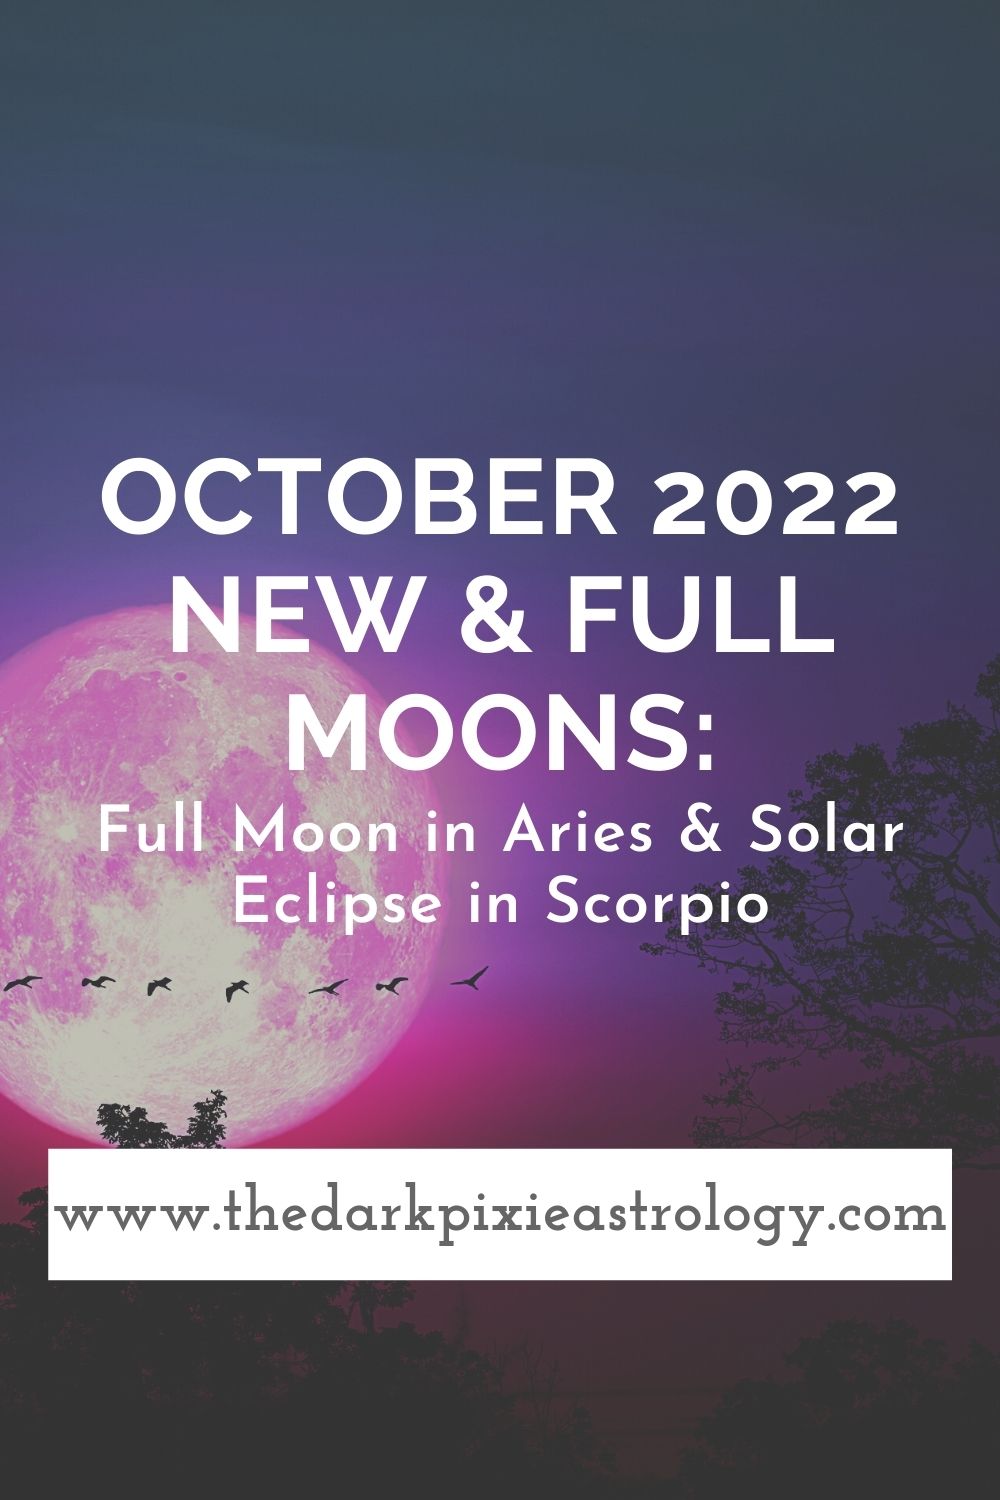 October 2022 New & Full Moons: Full Moon in Aries & Solar Eclipse in Scorpio - The Dark Pixie Astrology